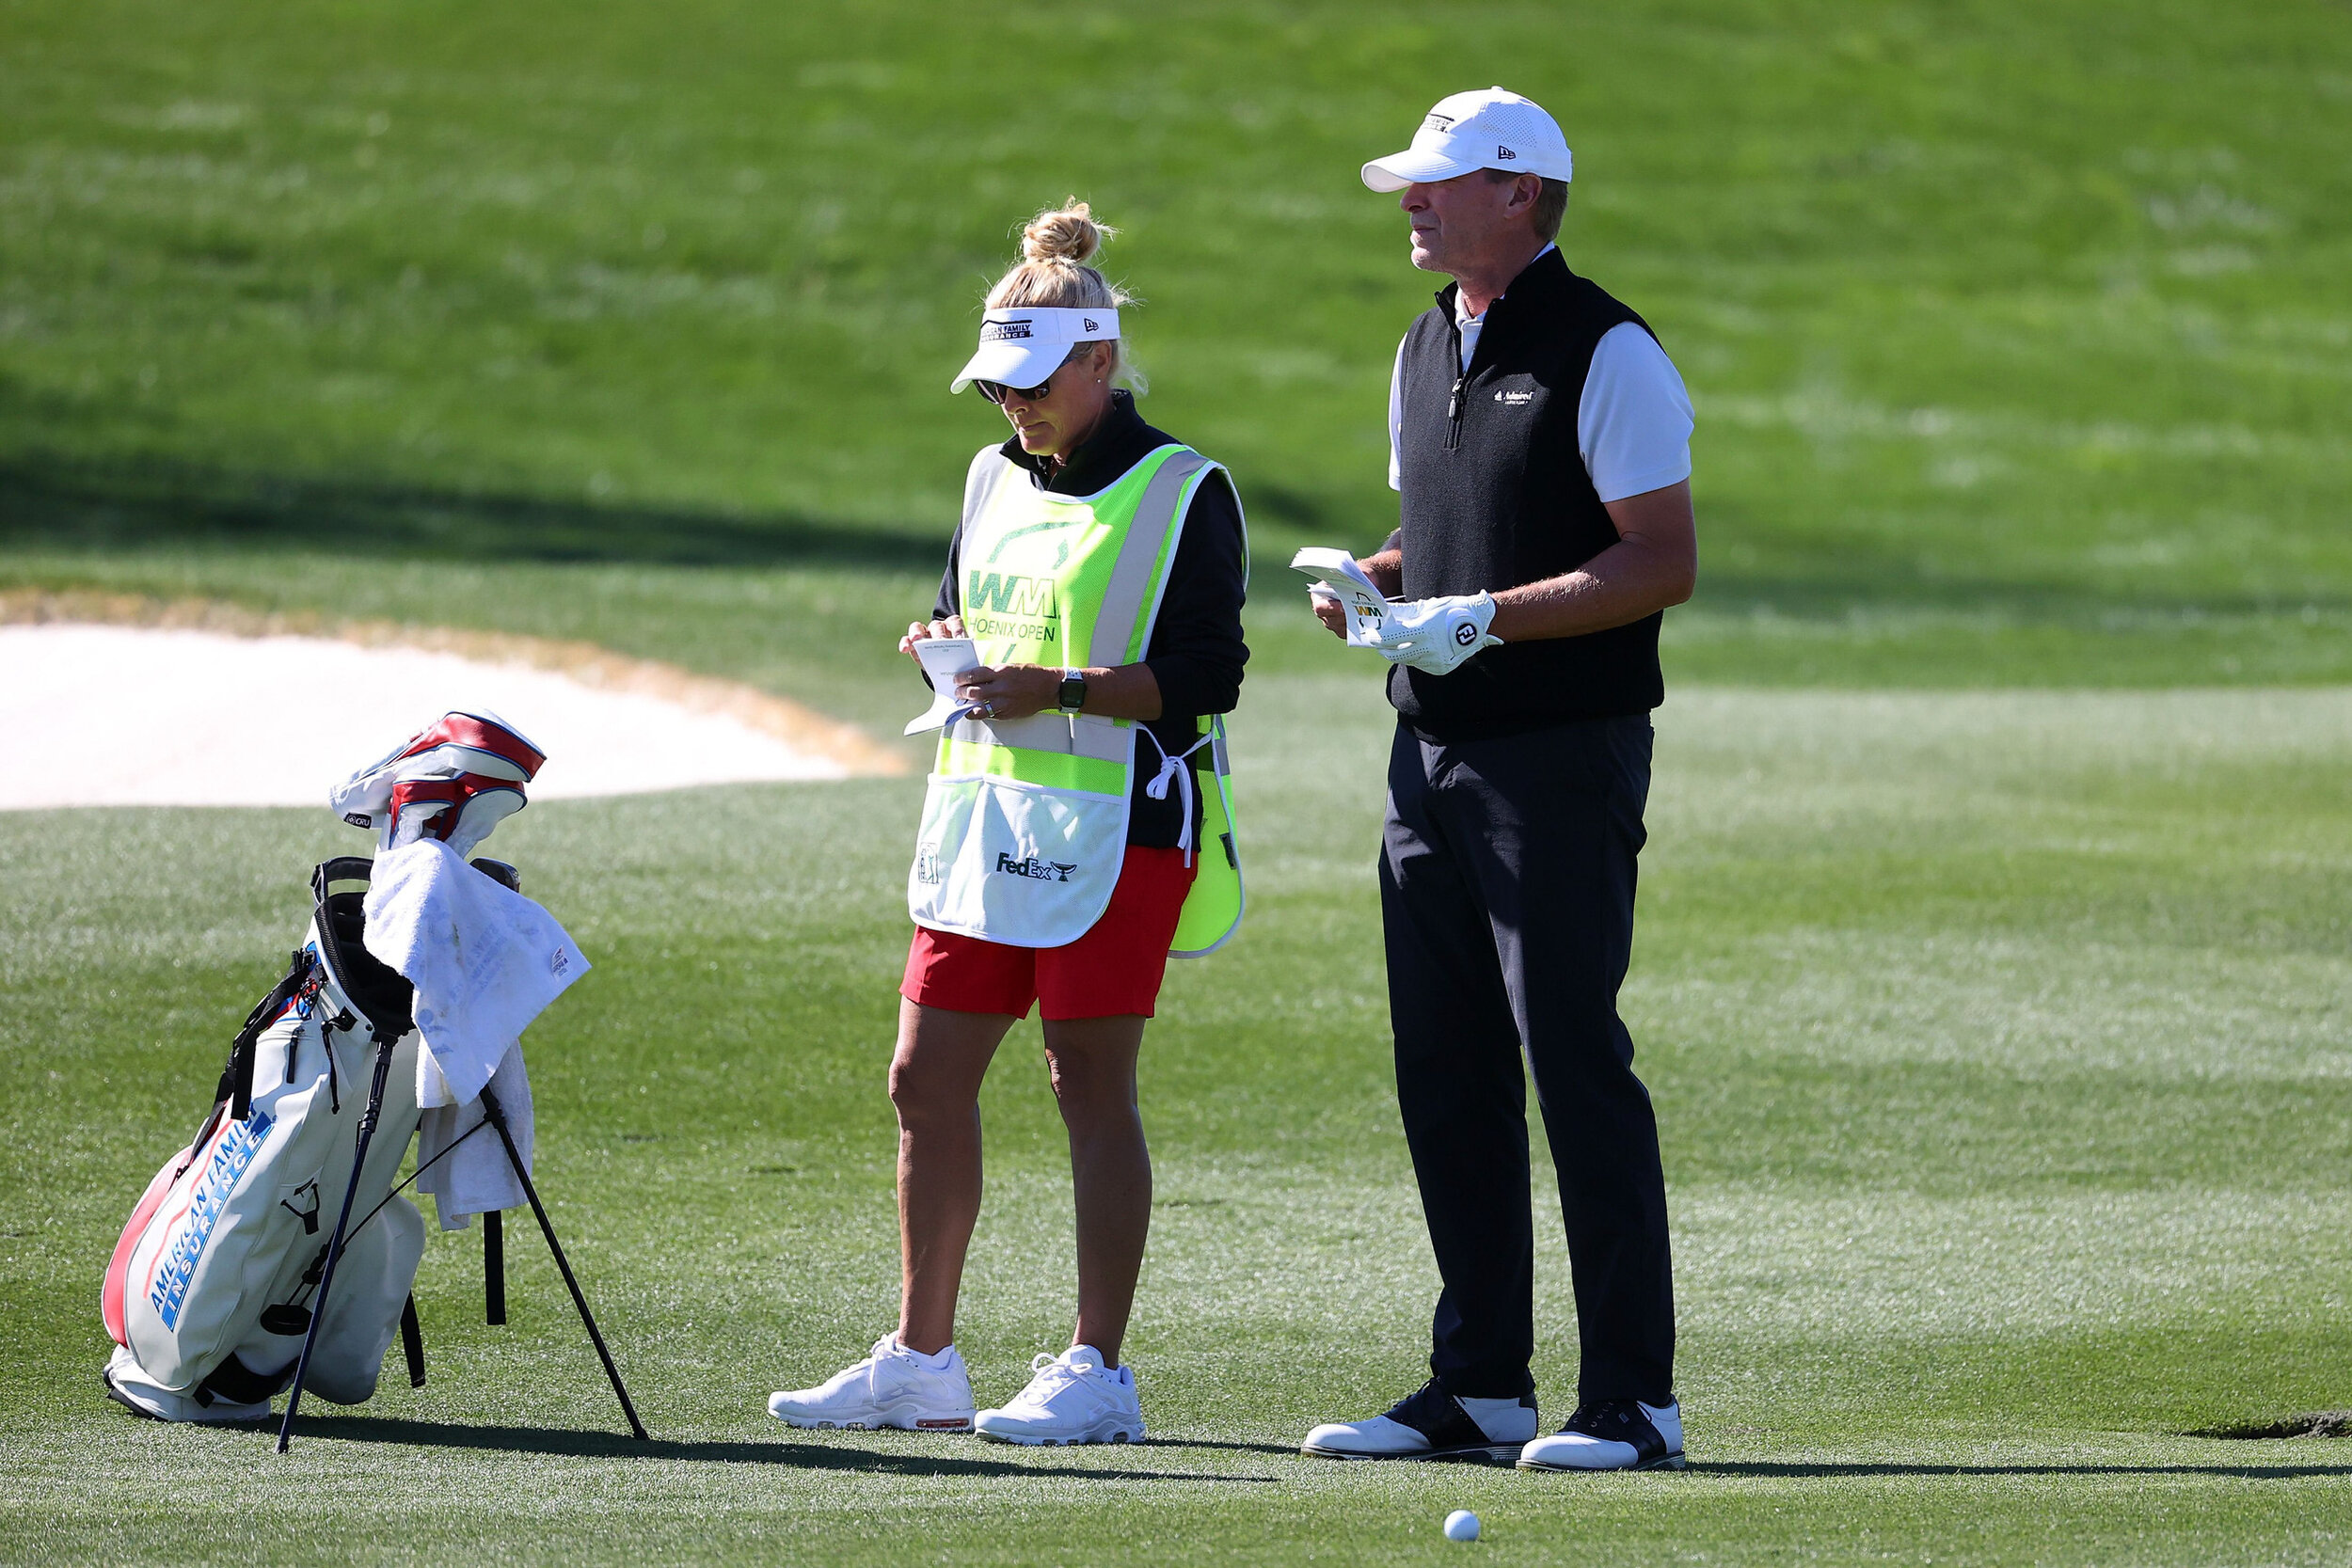  SCOTTSDALE, ARIZONA - FEBRUARY 05: Steve Stricker of the United States speaks with his caddie, Nicki Stricker, on the ninth hole during the second round of the Waste Management Phoenix Open at TPC Scottsdale on February 05, 2021 in Scottsdale, Arizo